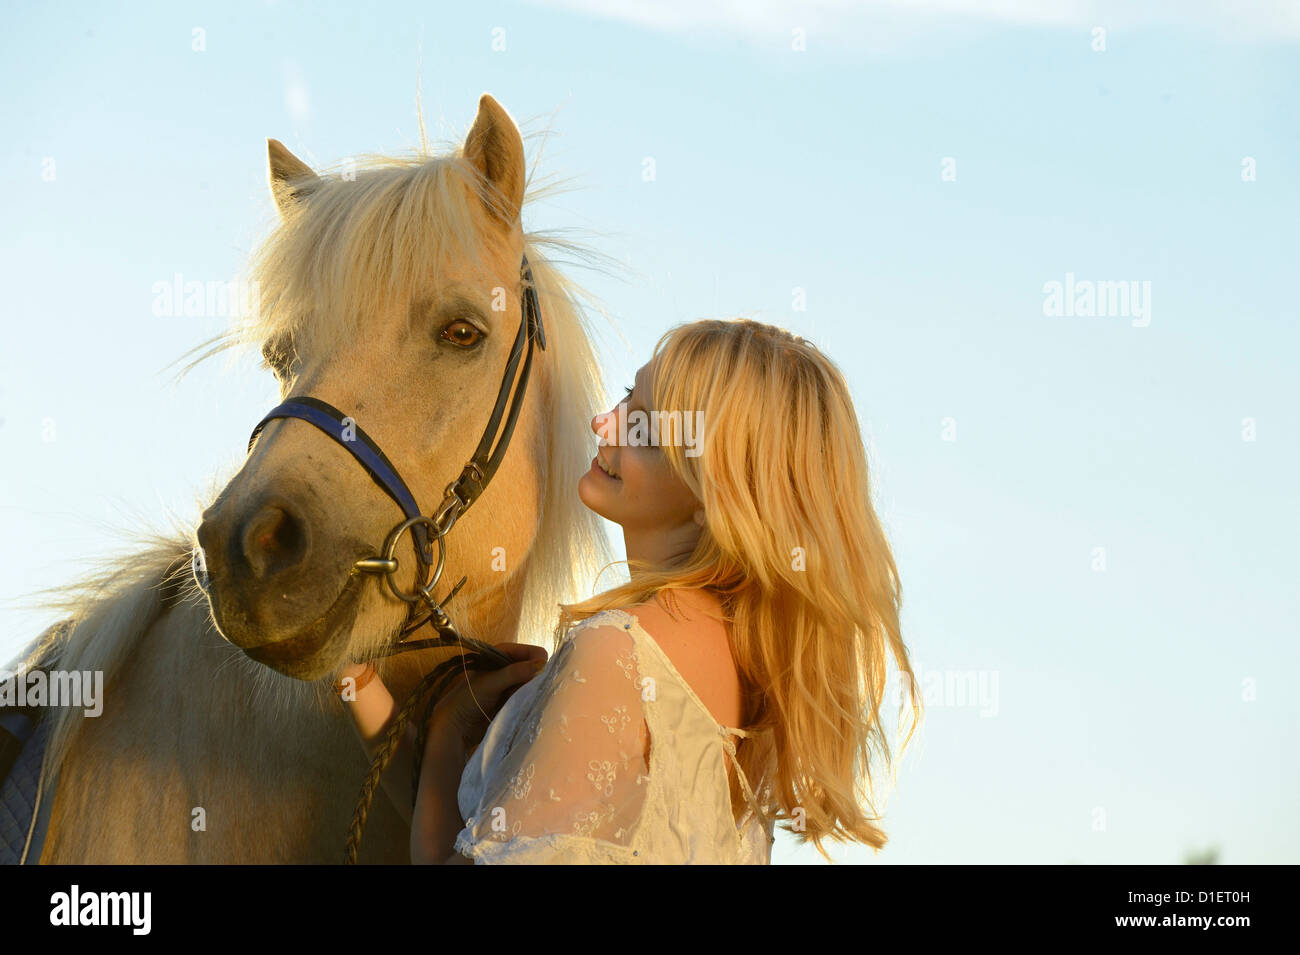 Smiling woman in white dress with horse Banque D'Images